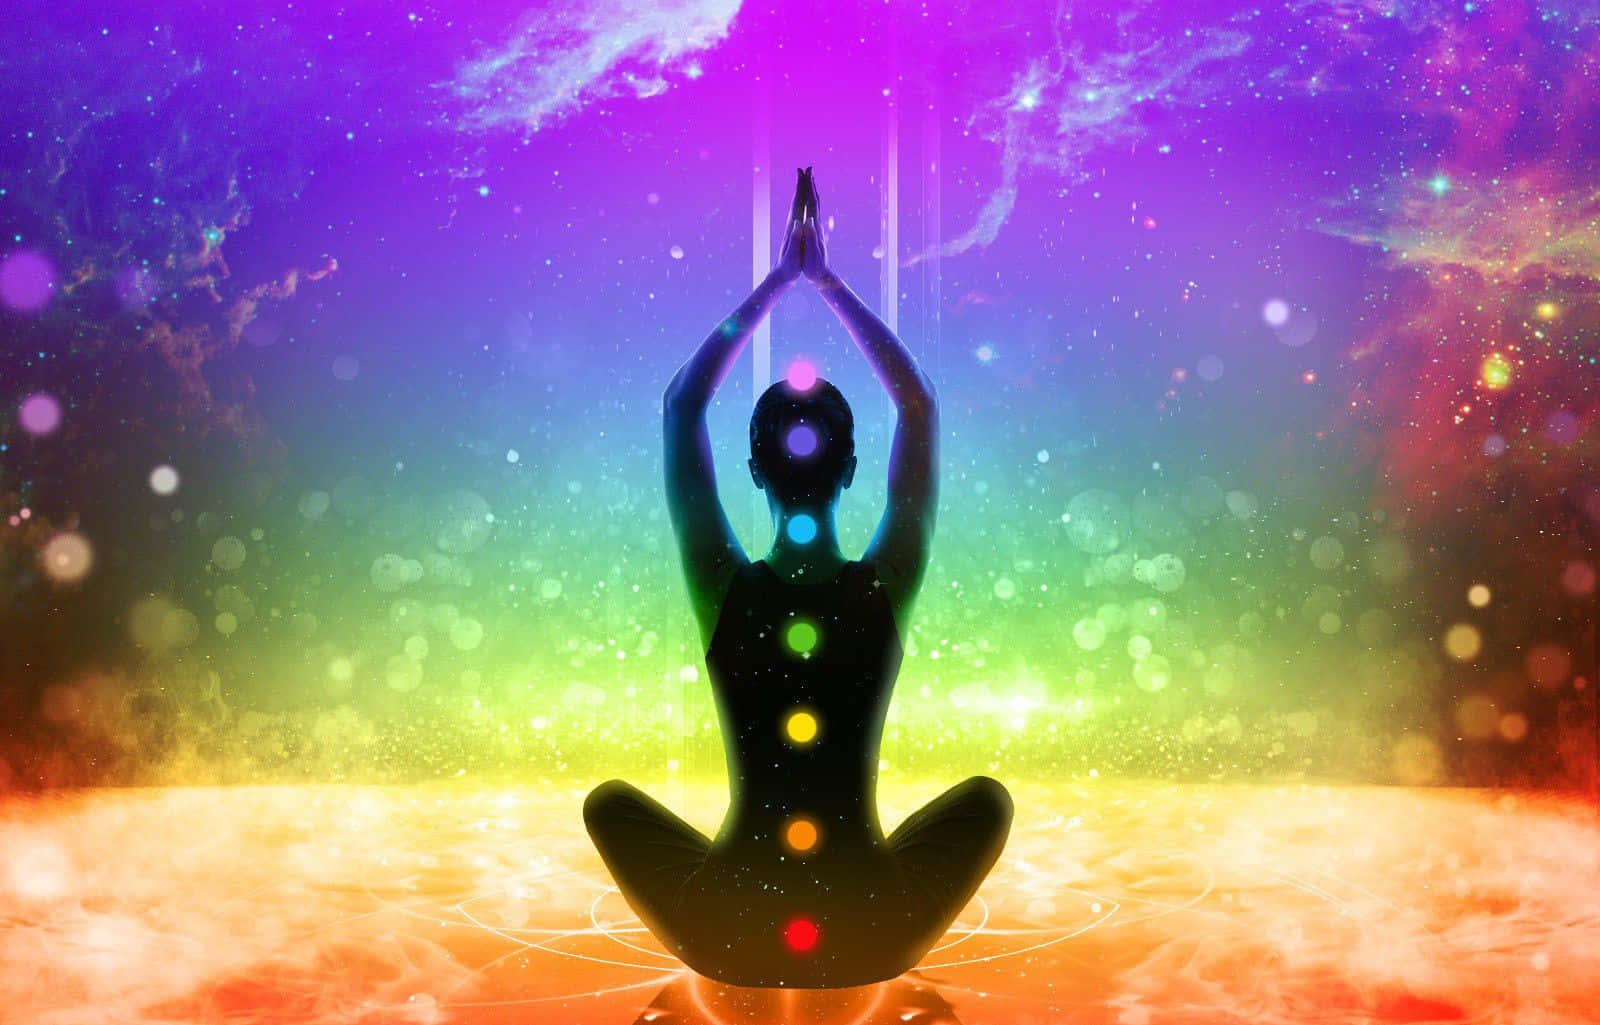 Chakra Background - Tranquil and Colorful Alignment of Energy Centers